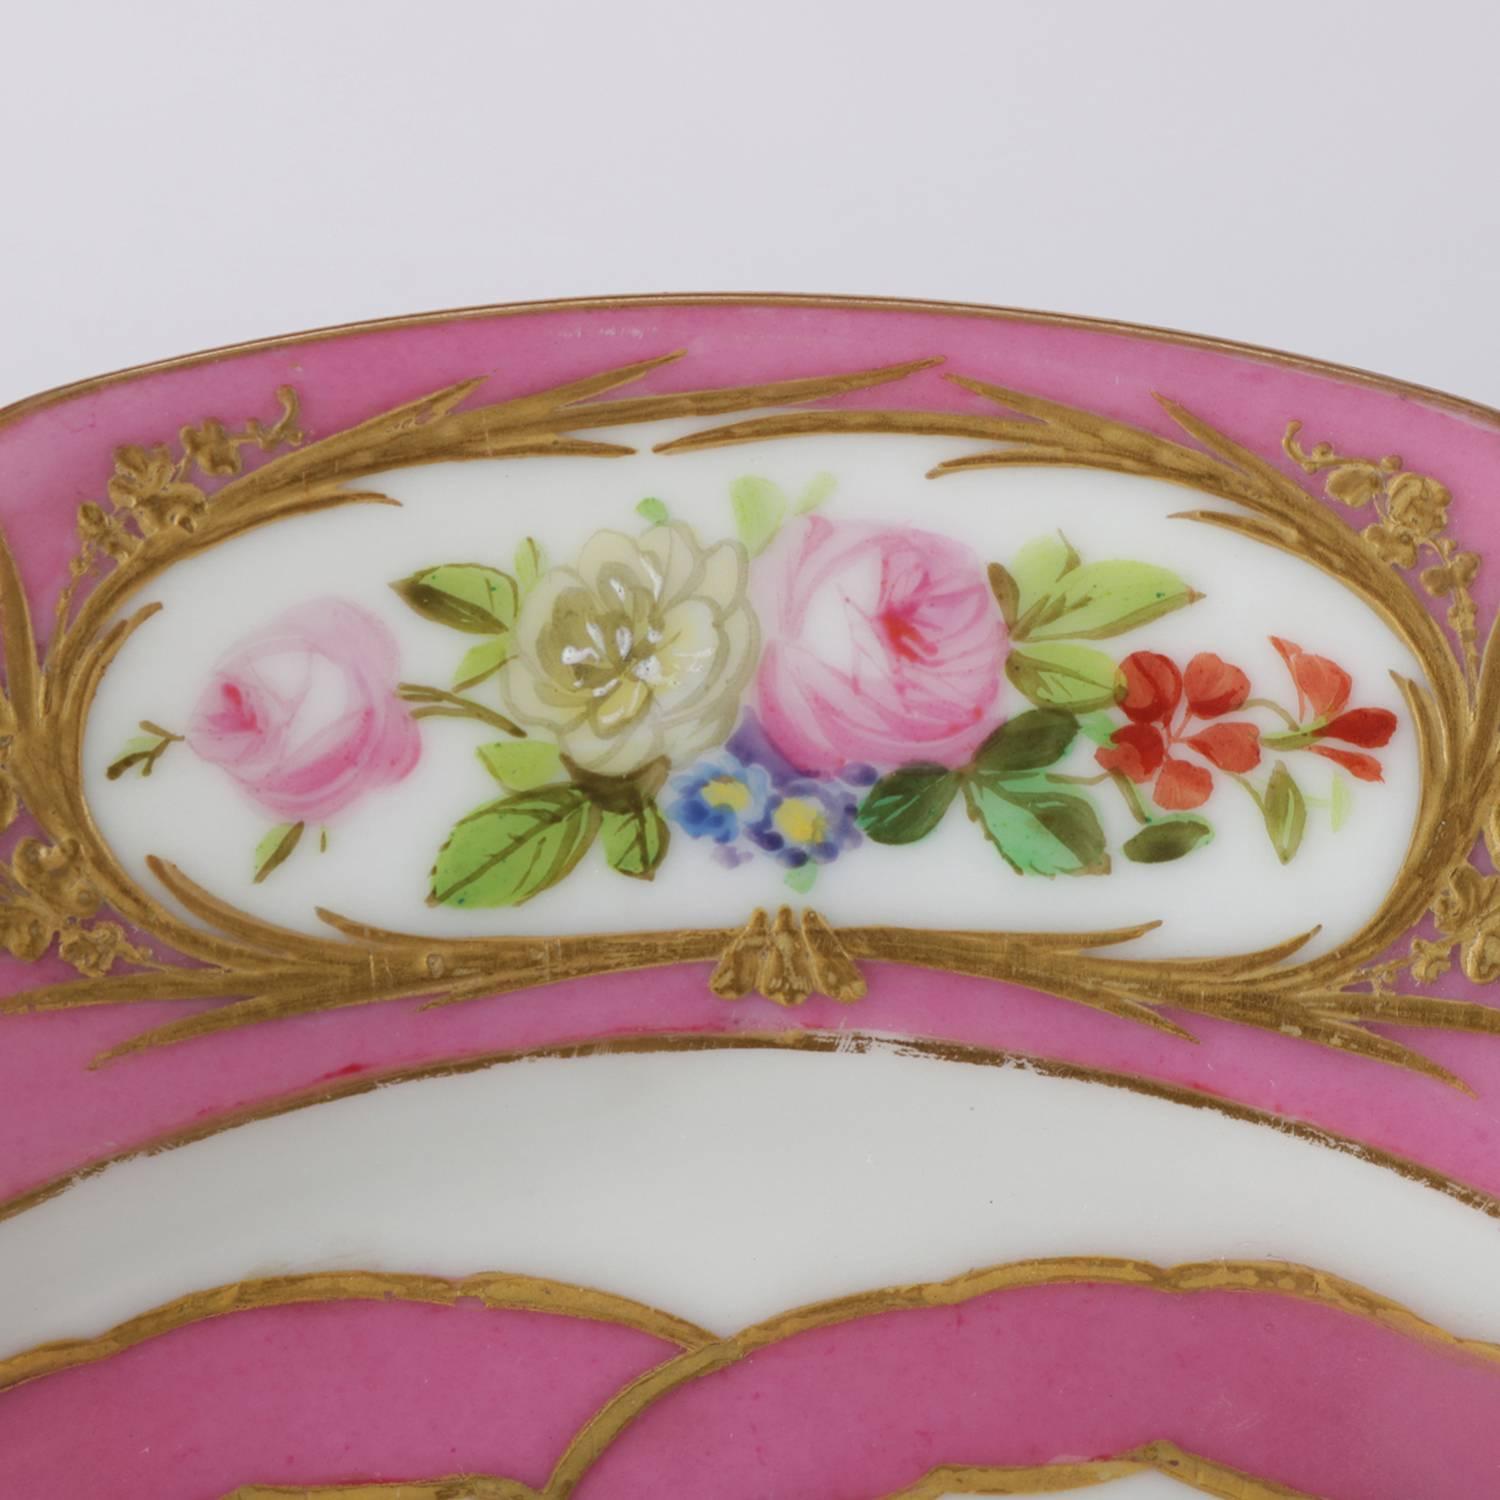 Antique French Sevres porcelain hand-painted porcelain portrait plate features central portrait, scalloped border with floral reserves and gilt accents, en verso with Sevres double 